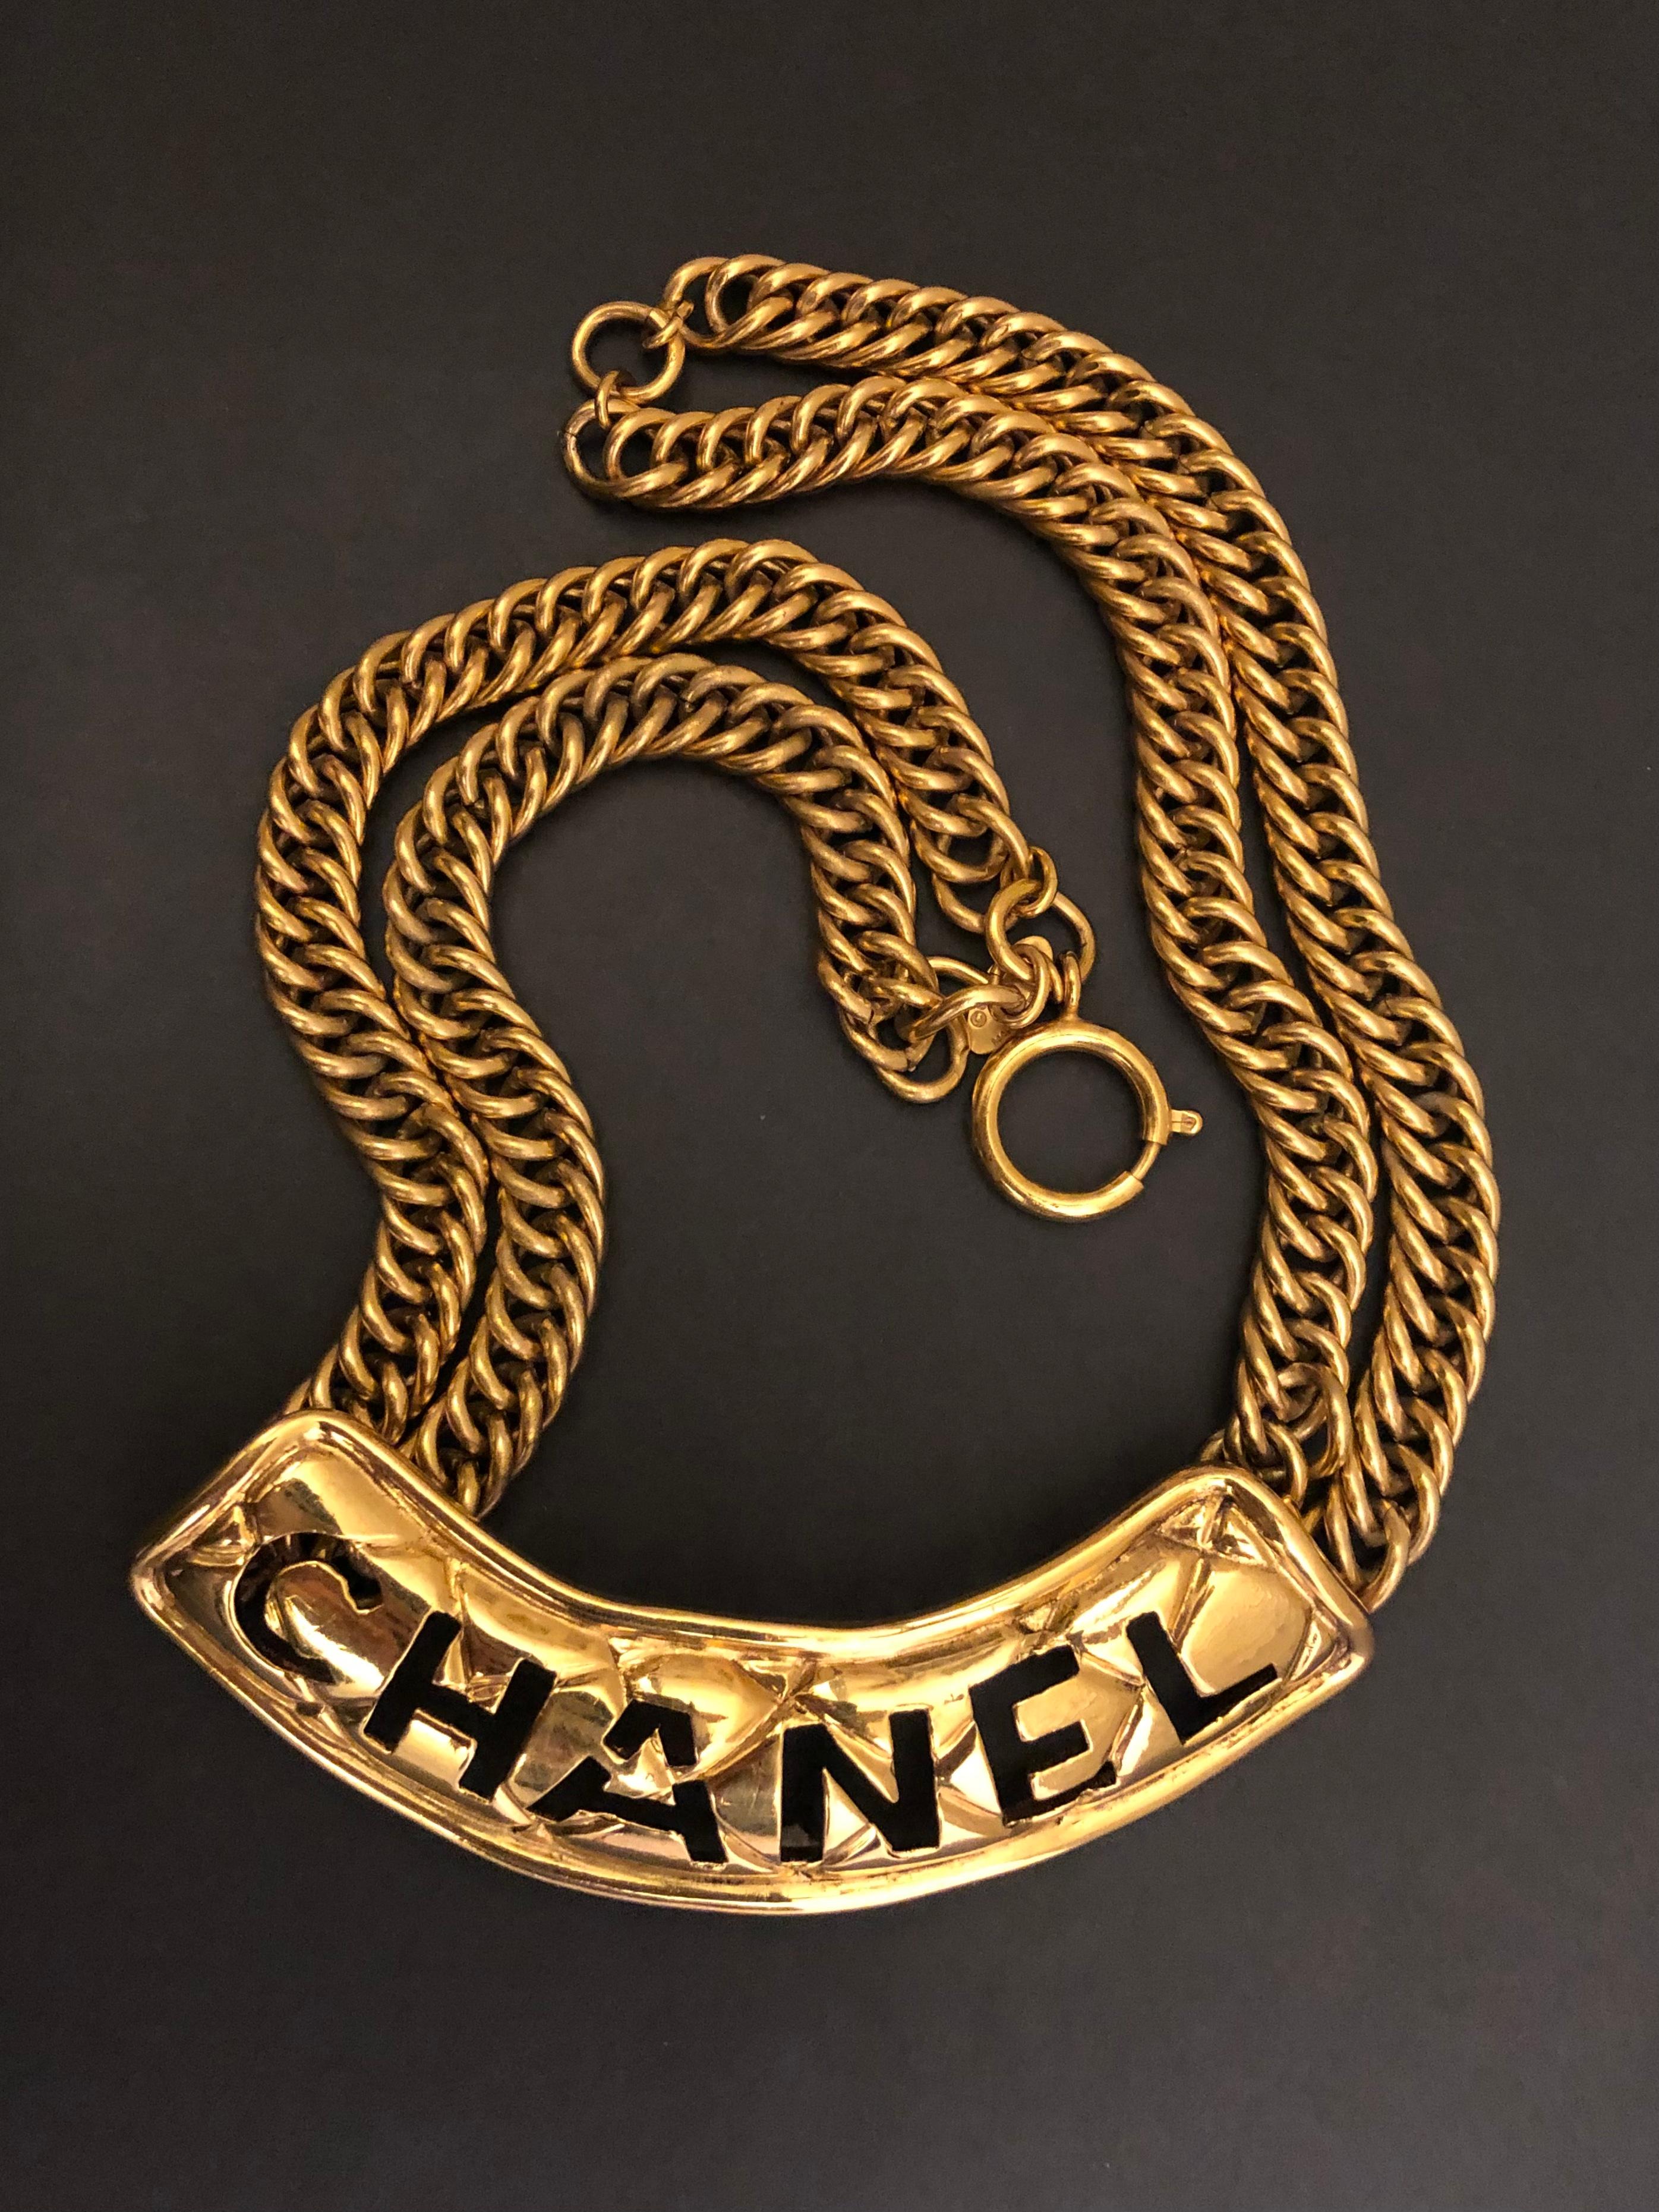 This vintage CHANEL gold toned chain necklace is crafted if gold toned metal featuring double chains and a cut-out CHANEL plate in quilted pattern. Spring ring closure. Stamped CHANEL made in France. Measures approximately 43 cm Charm. Comes with